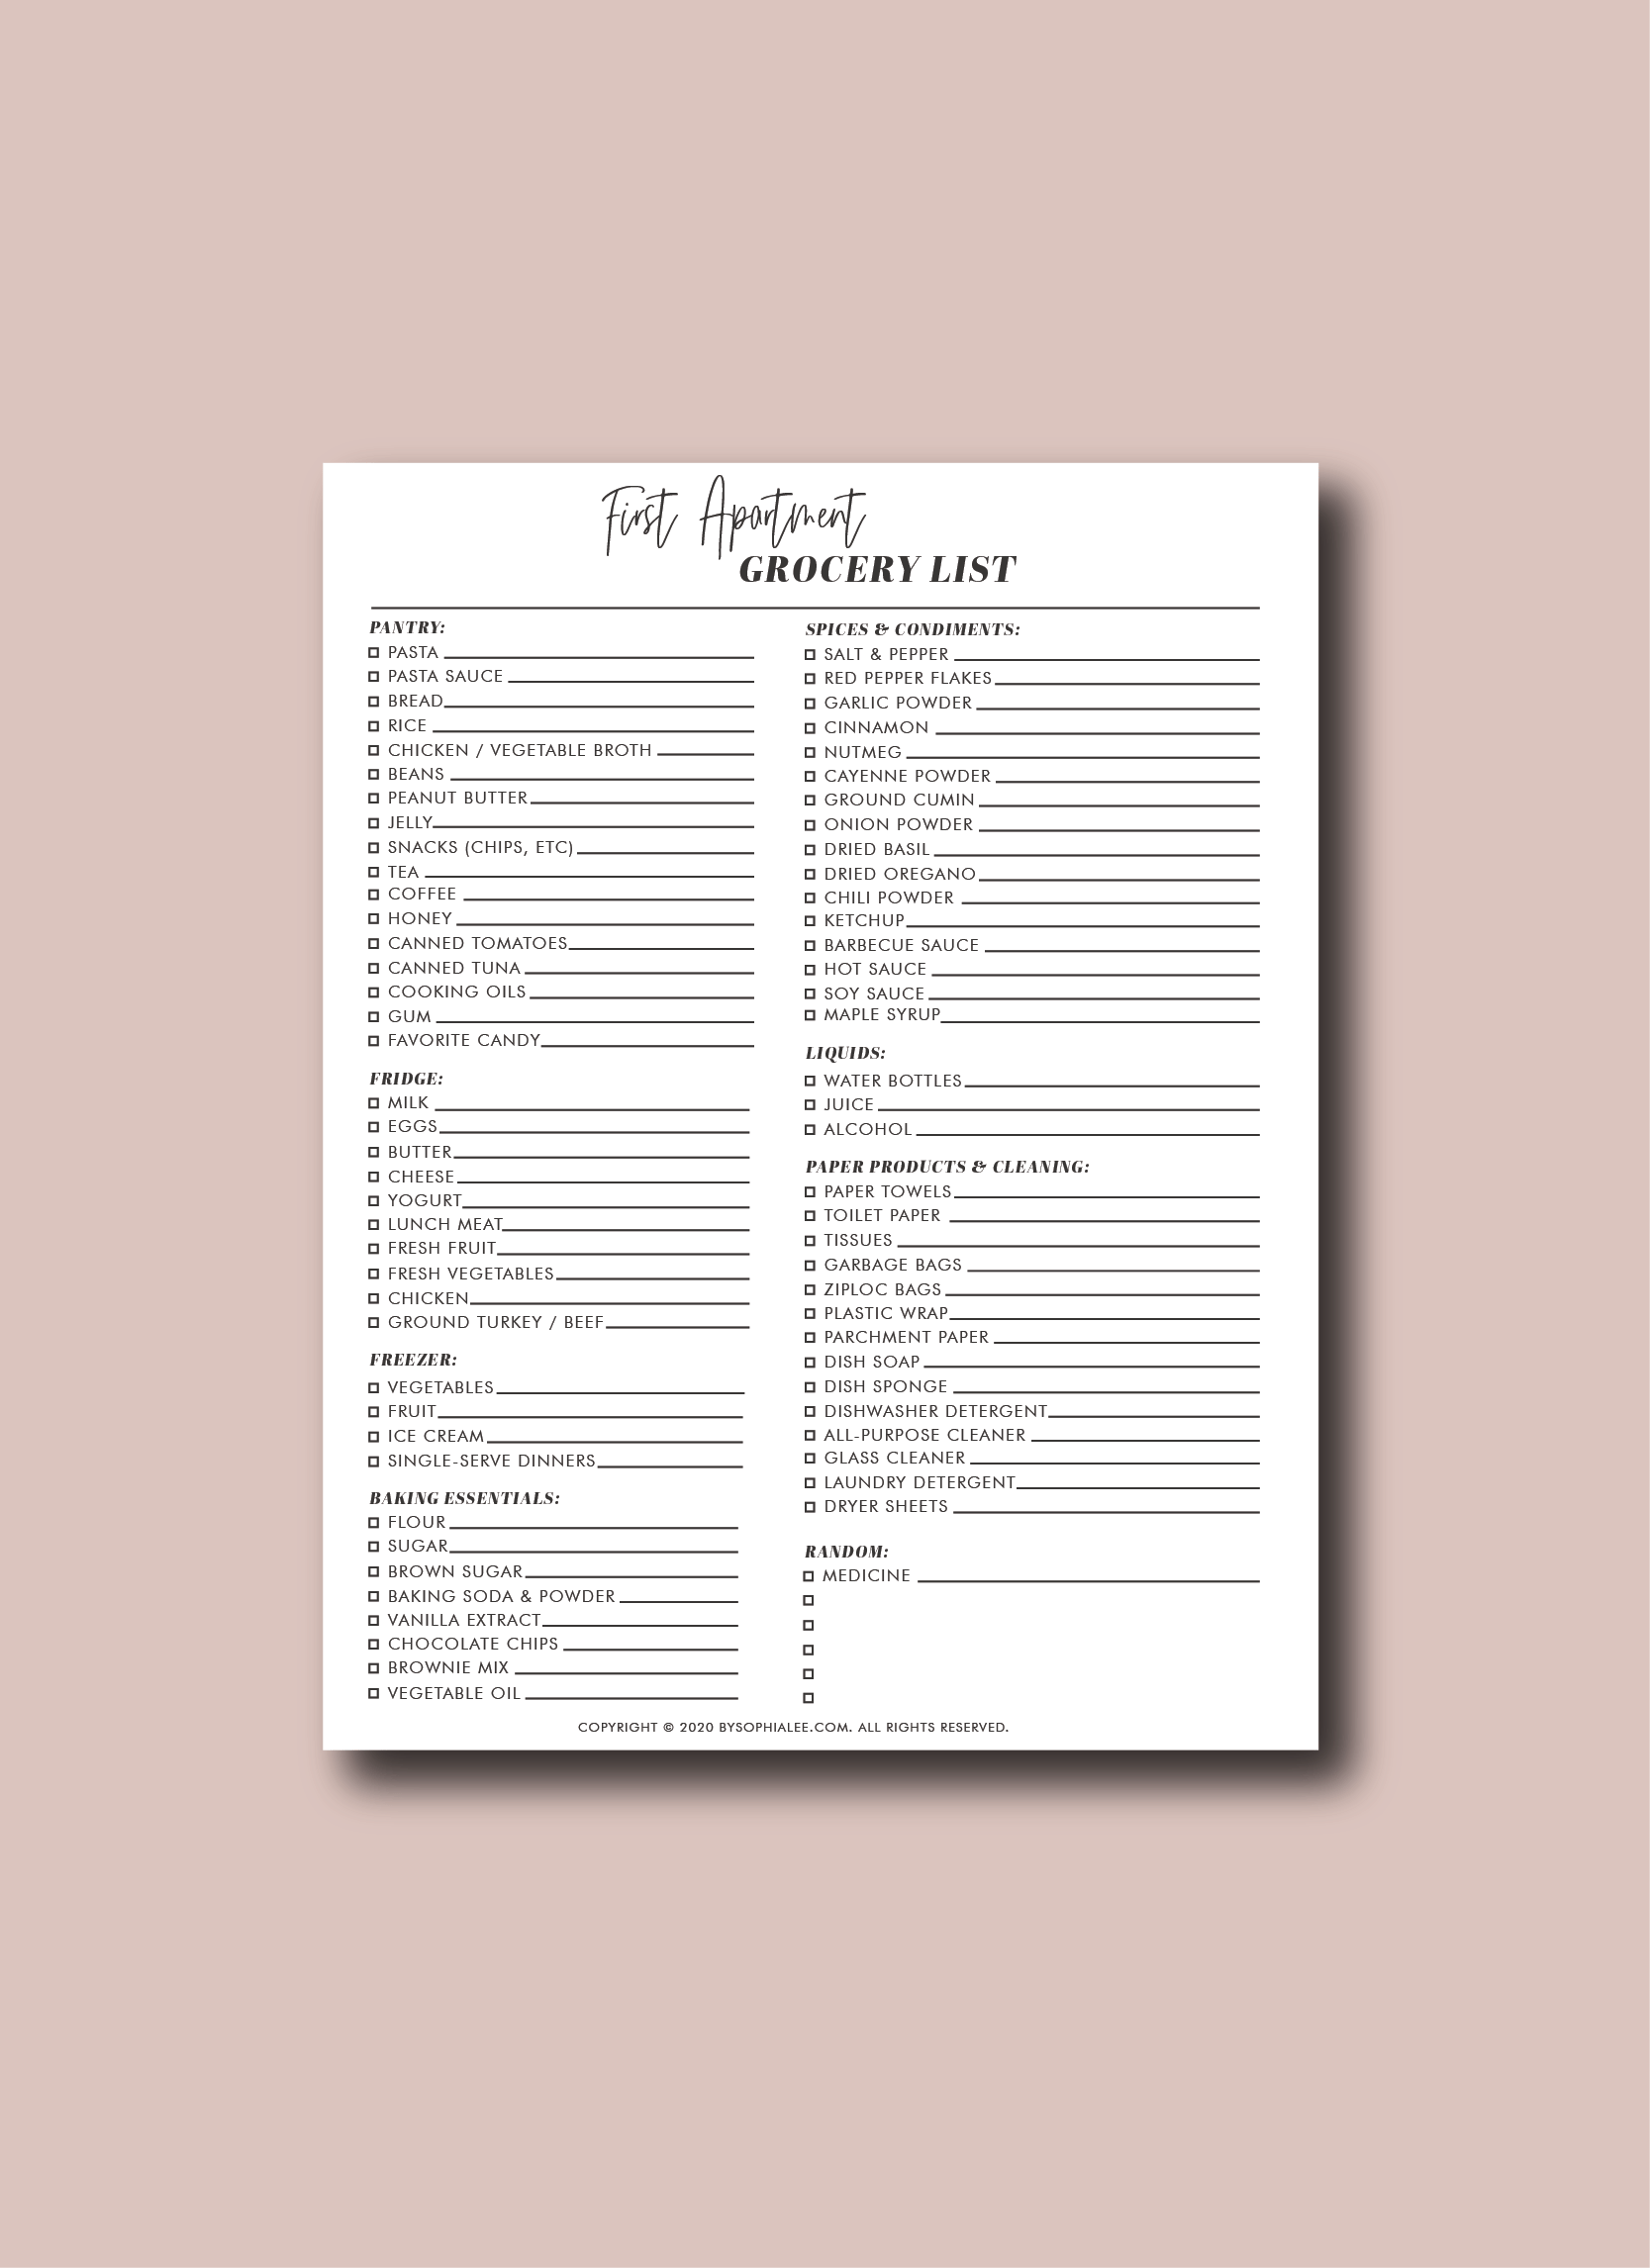 https://bysophialee.com/wp-content/uploads/first-apartment-grocery-list-2.png